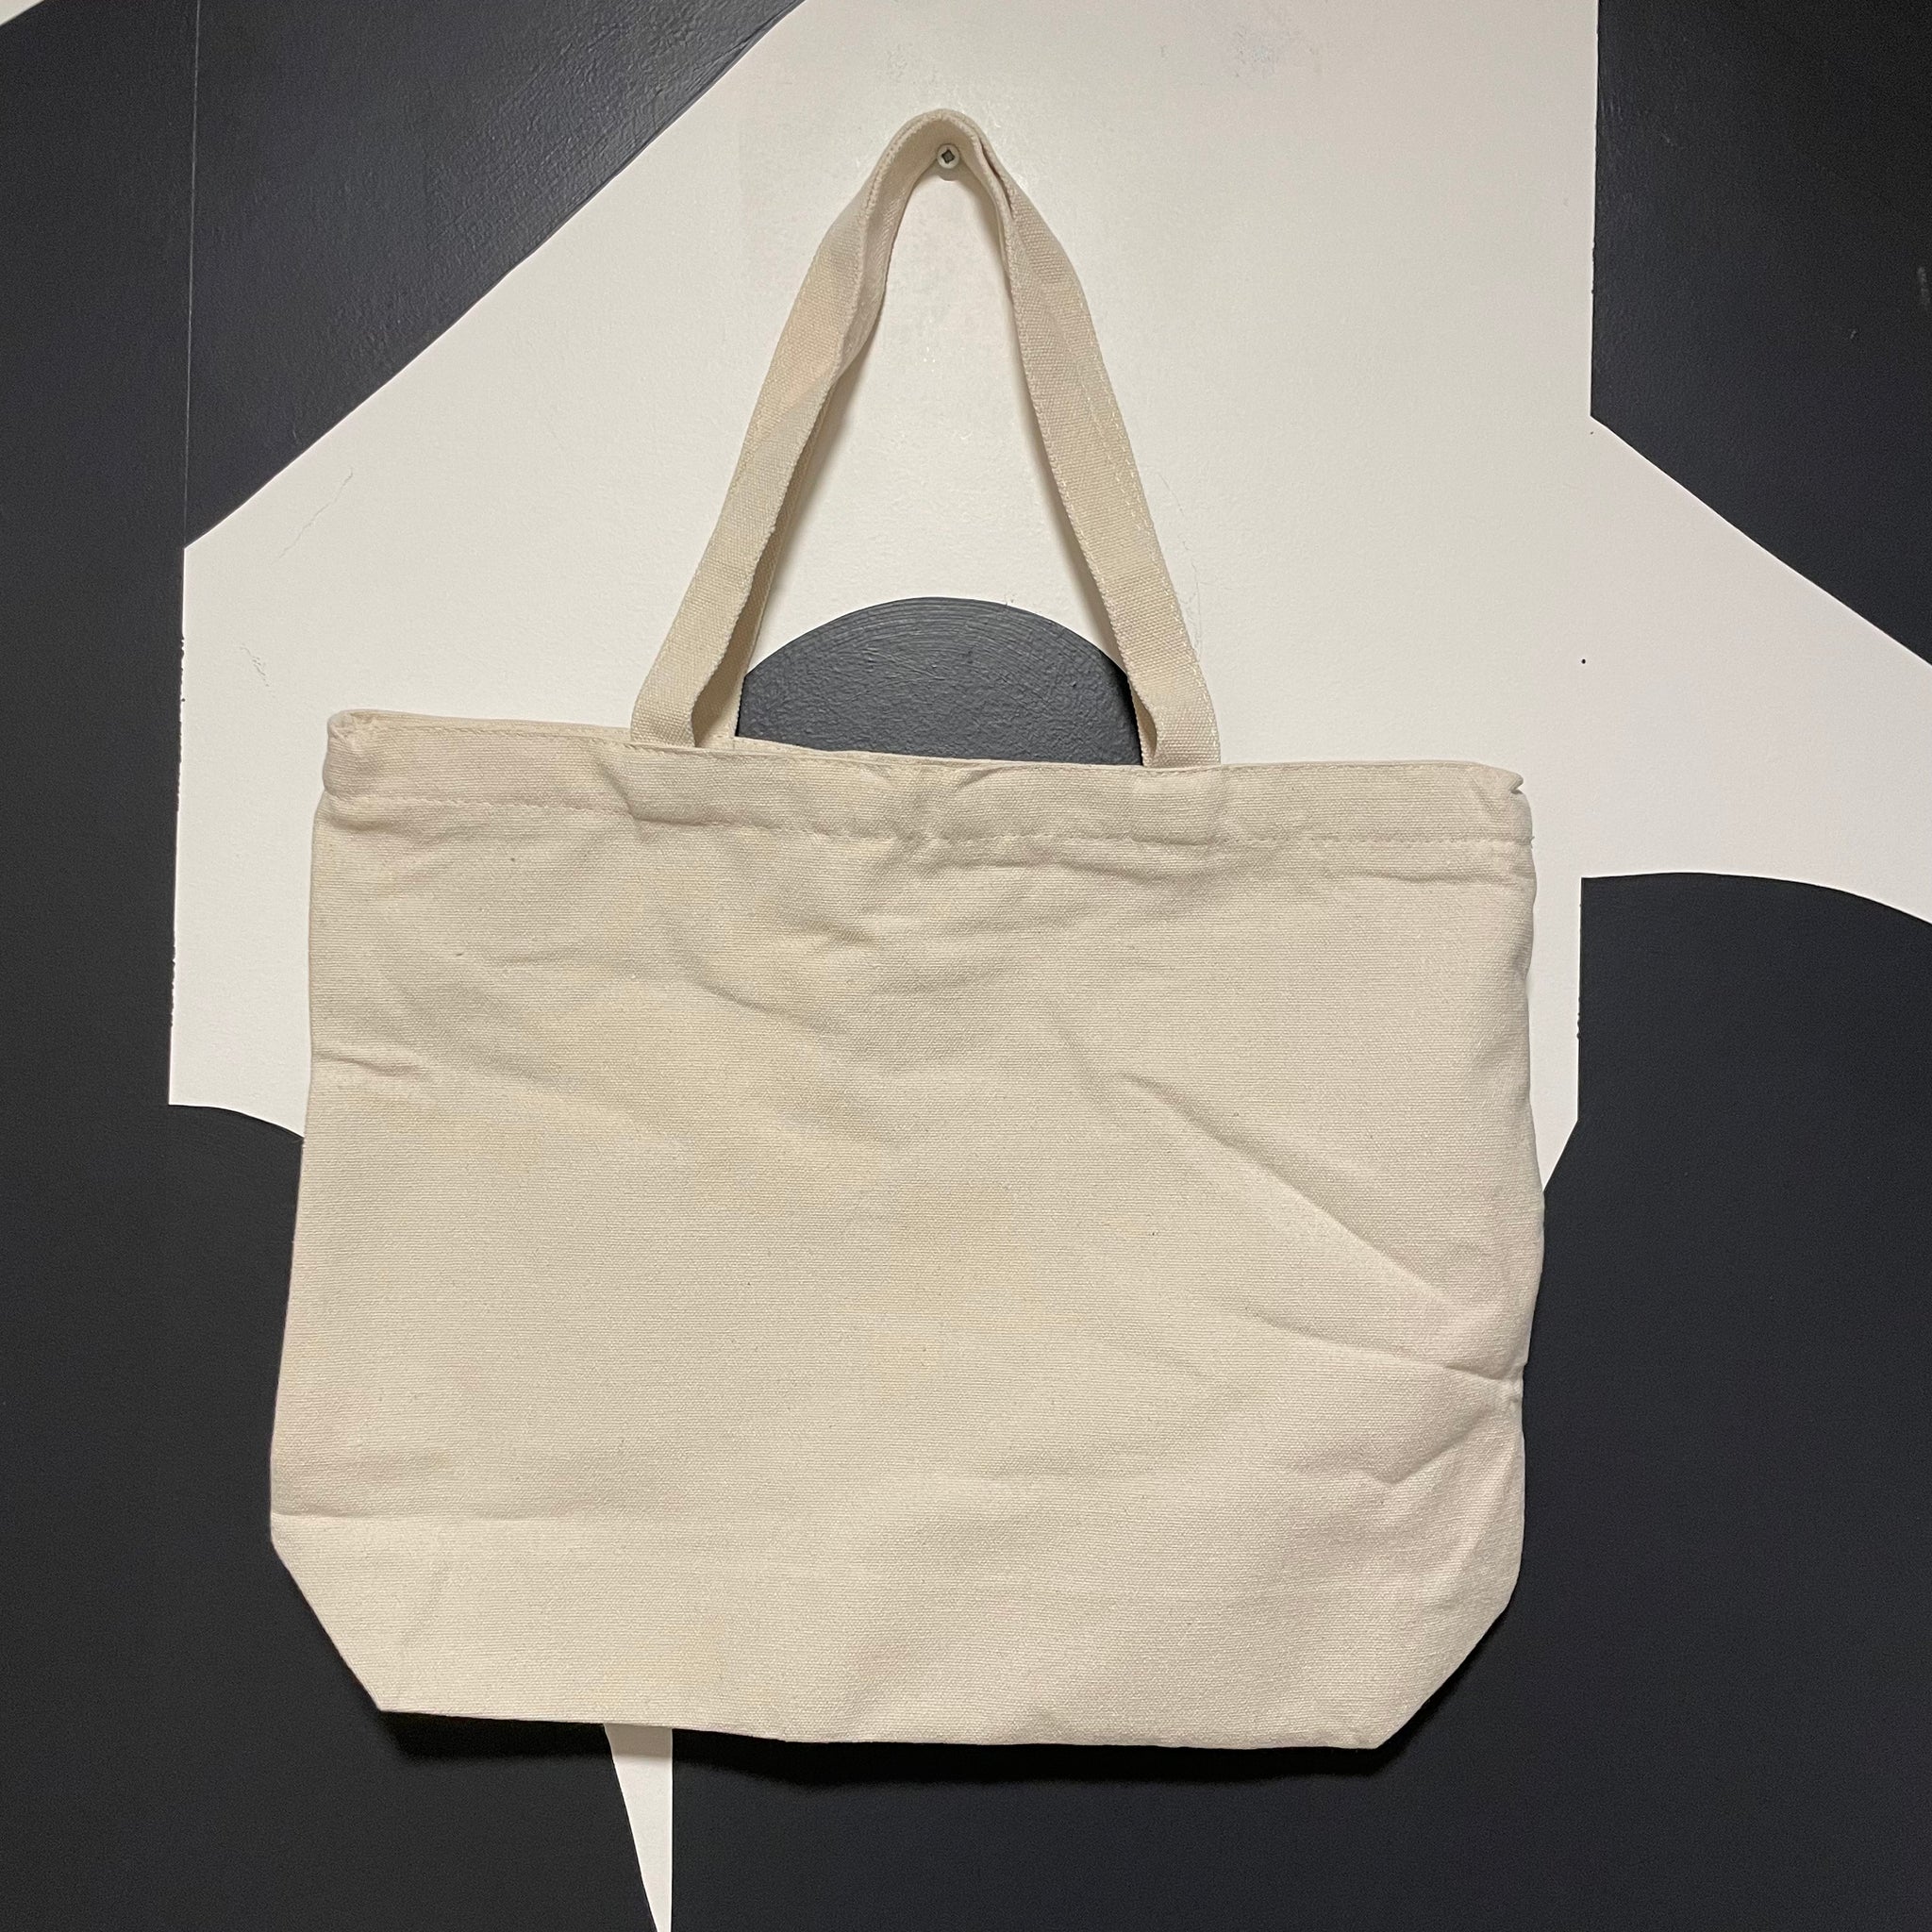 Goods & Services Tote by Alt Haus